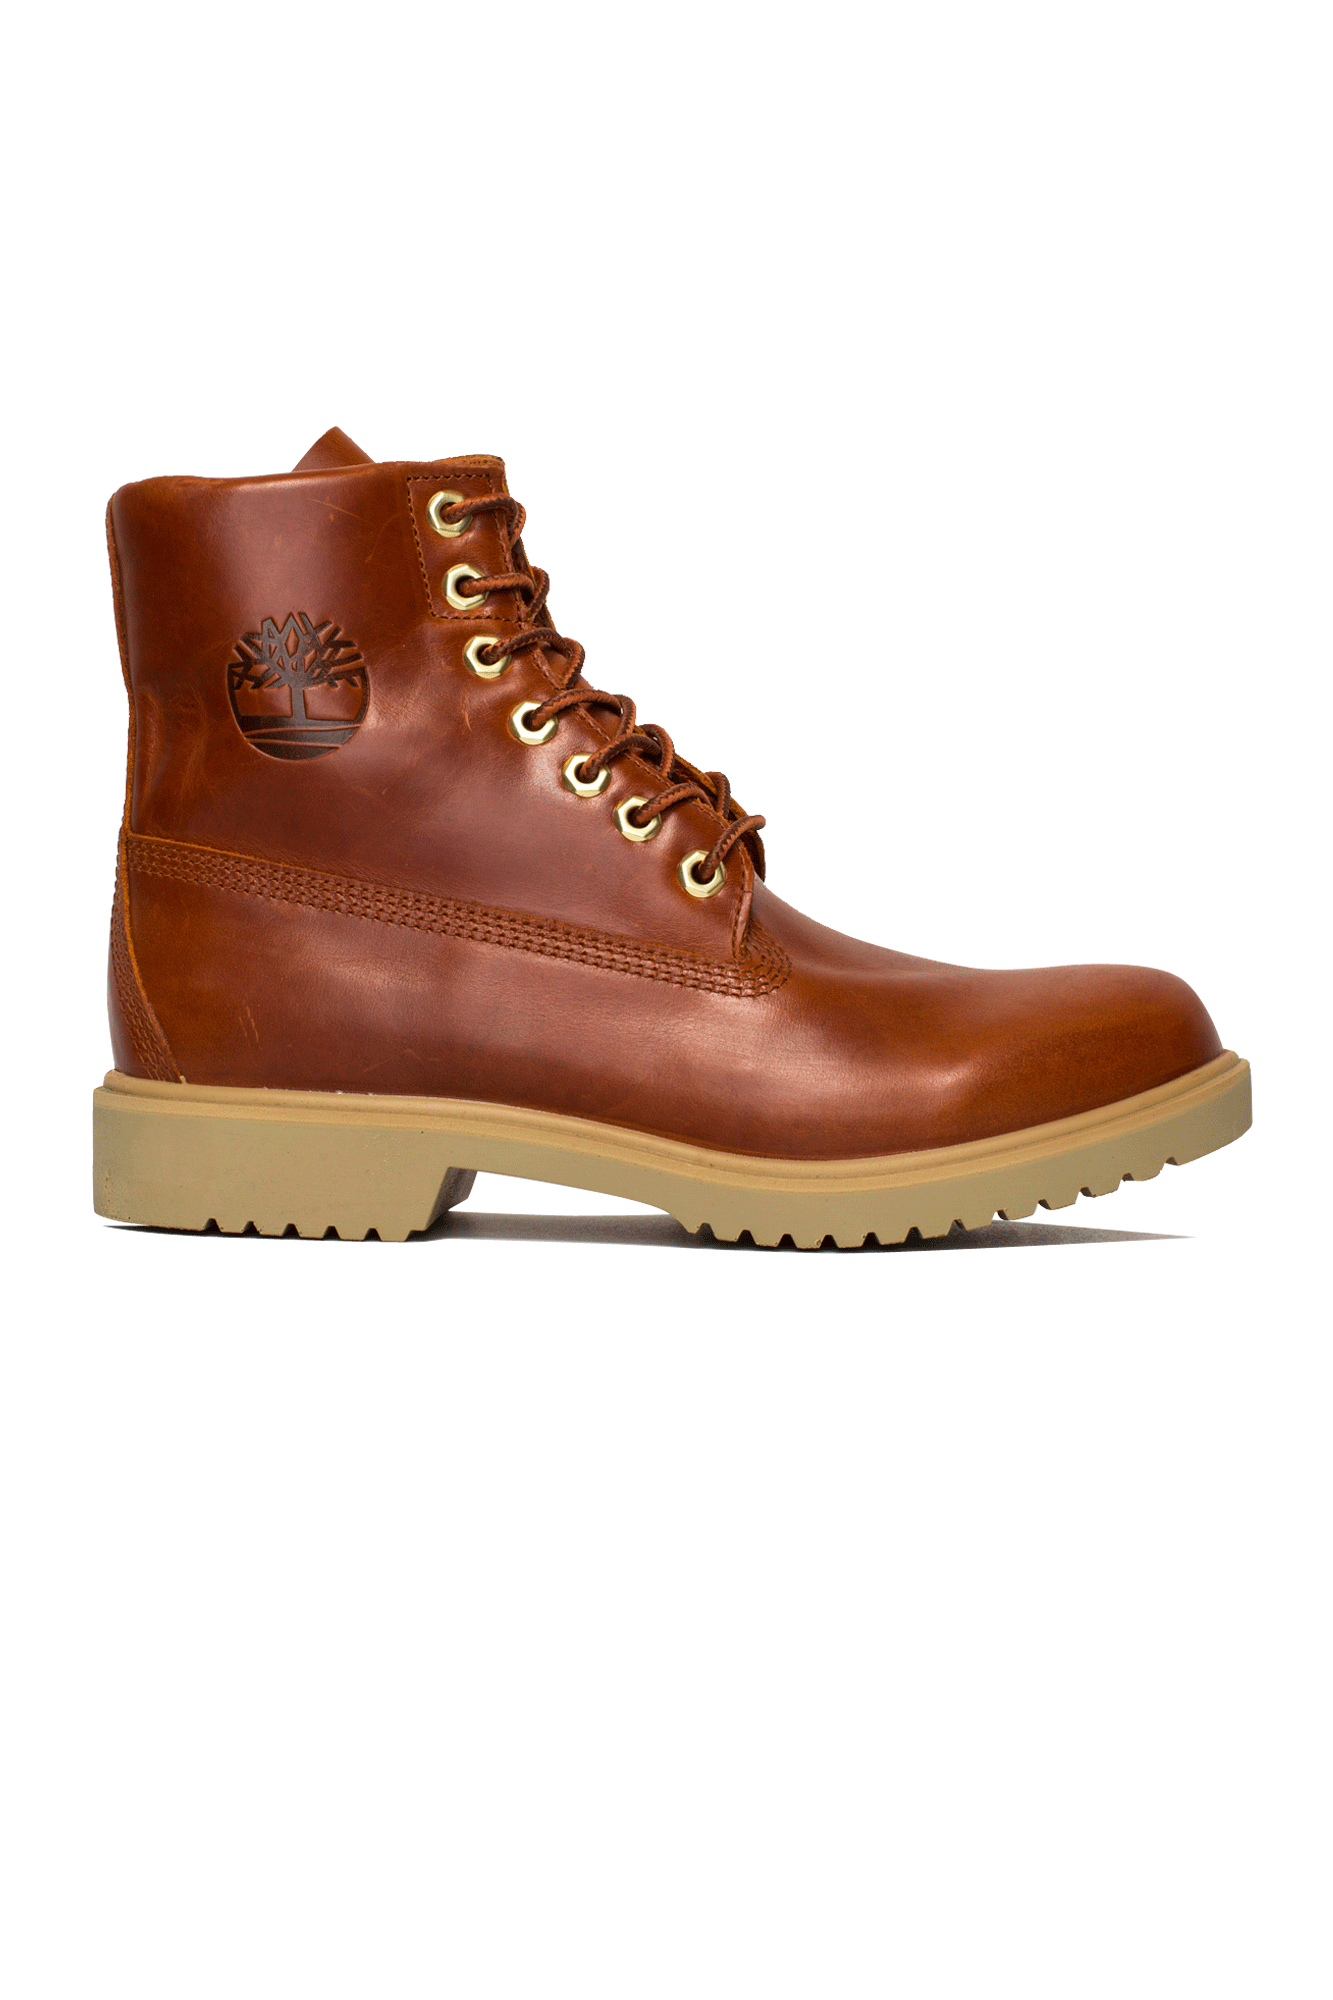 Timberland One Block Down selection